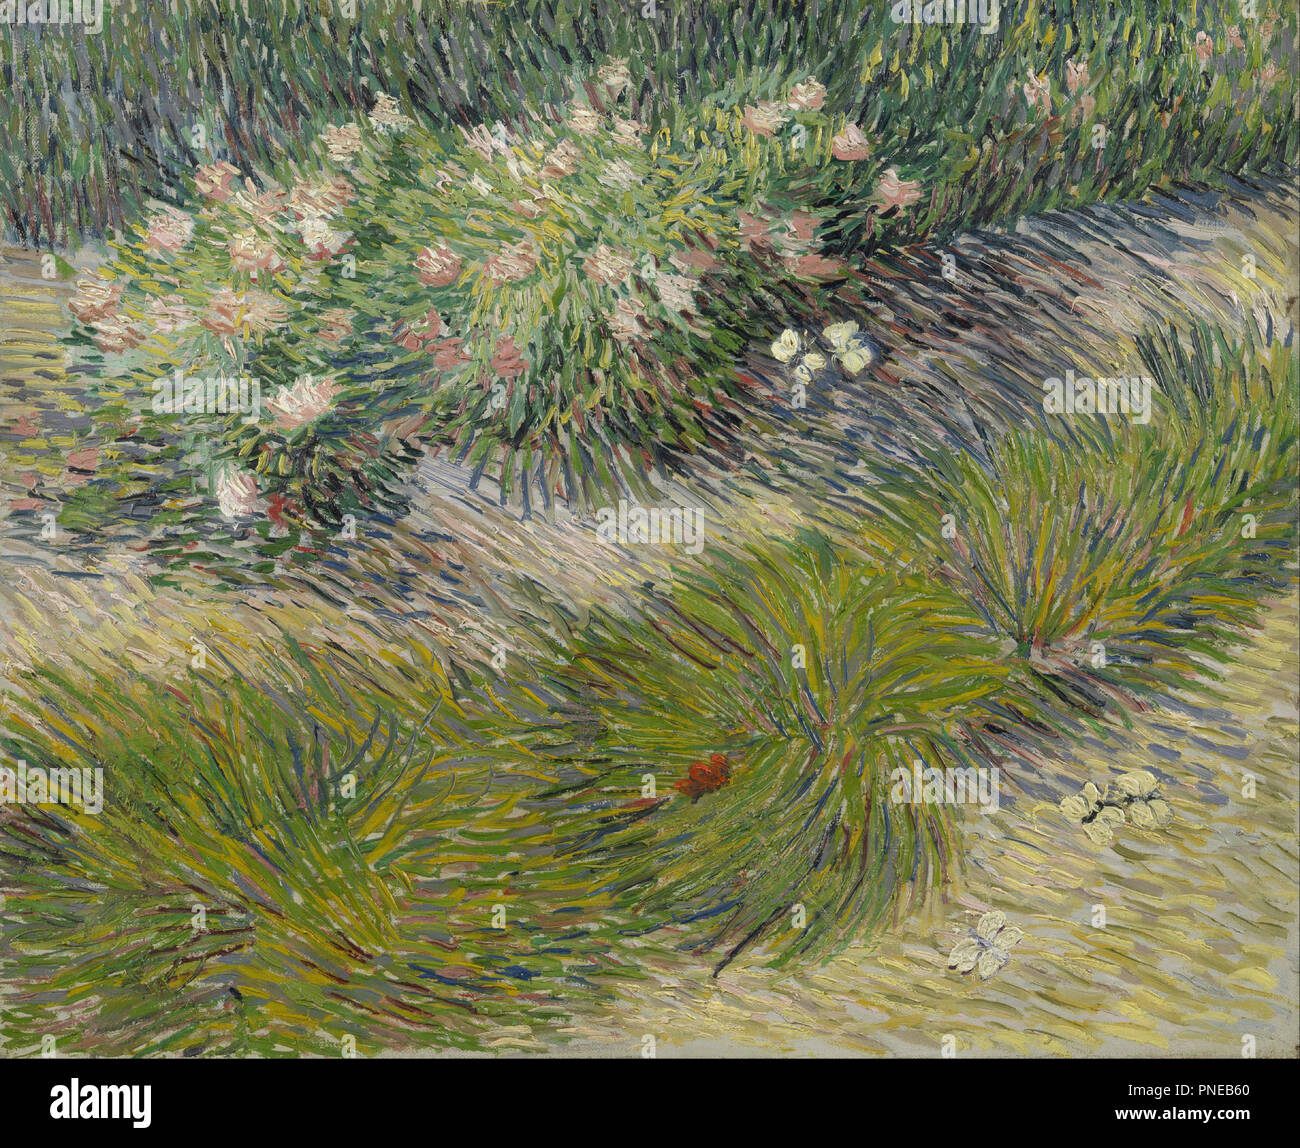 Lawn with butterflies. Date/Period: Arles, April 1889. Painting. Oil on canvas. Height: 51 cm (20 in); Width: 61 cm (24 in). Author: VINCENT VAN GOGH. VAN GOGH, VINCENT. Stock Photo